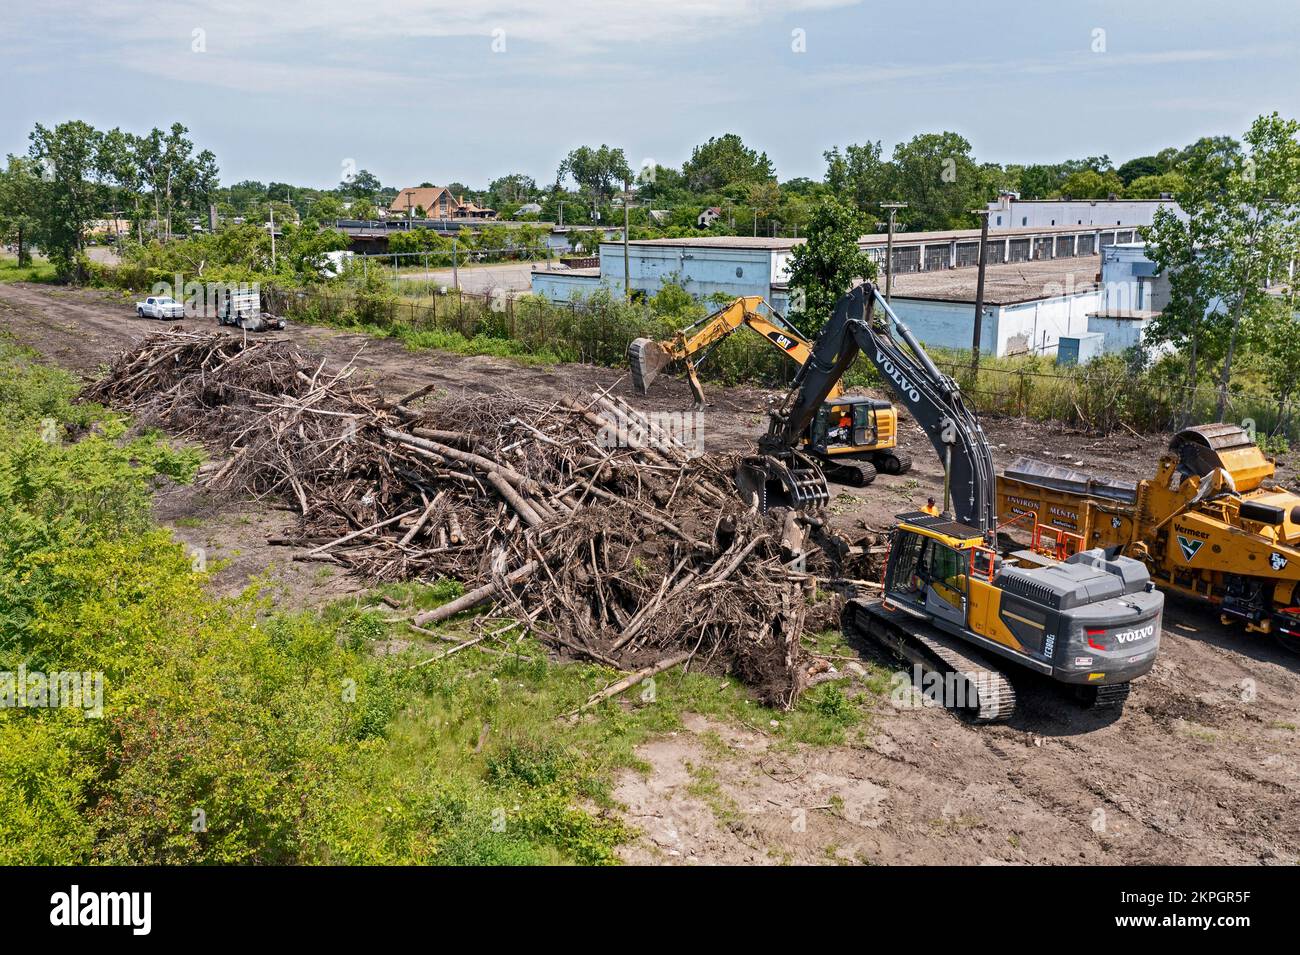 Detroit, Michigan - Using heavy equipment, workers clear trees, shredding them into woodchips, from an abandoned railroad right of way. They are clear Stock Photo